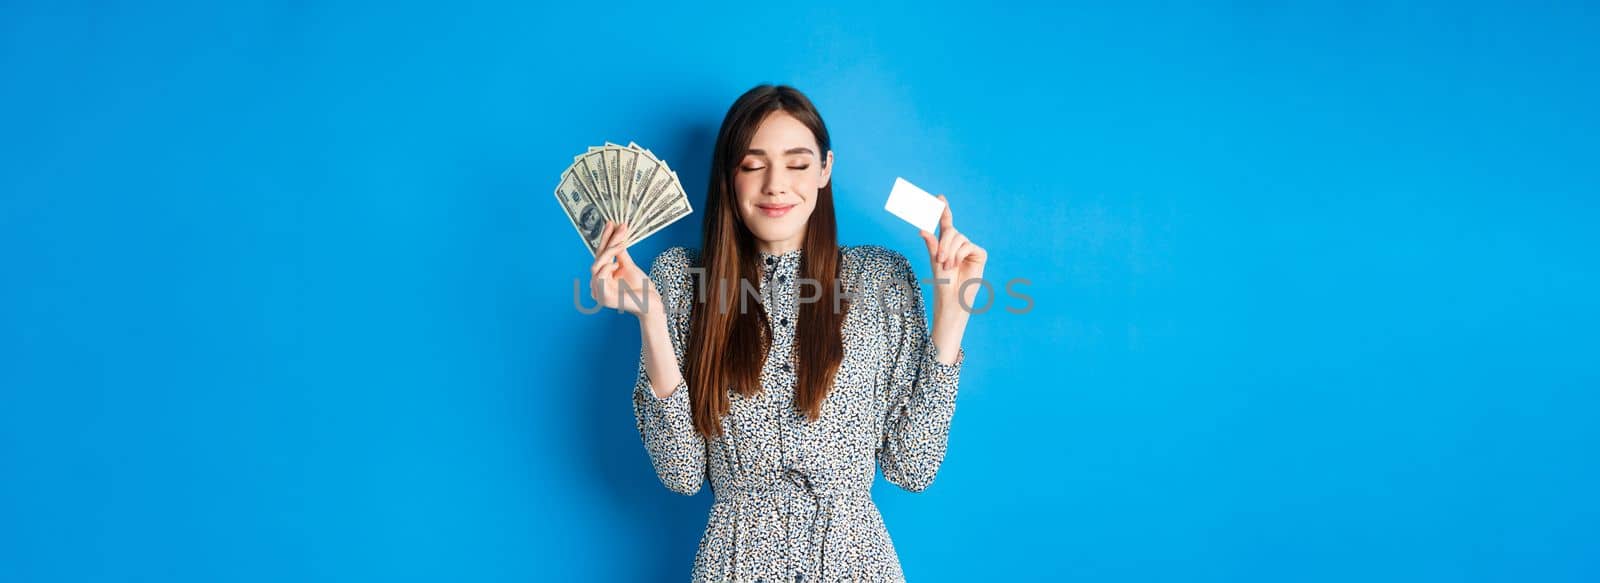 Shopping. Happy smiling woman looking satisfied with eyes closed, showing money dollar bills and plastic credit card, standing dreamy against blue background.